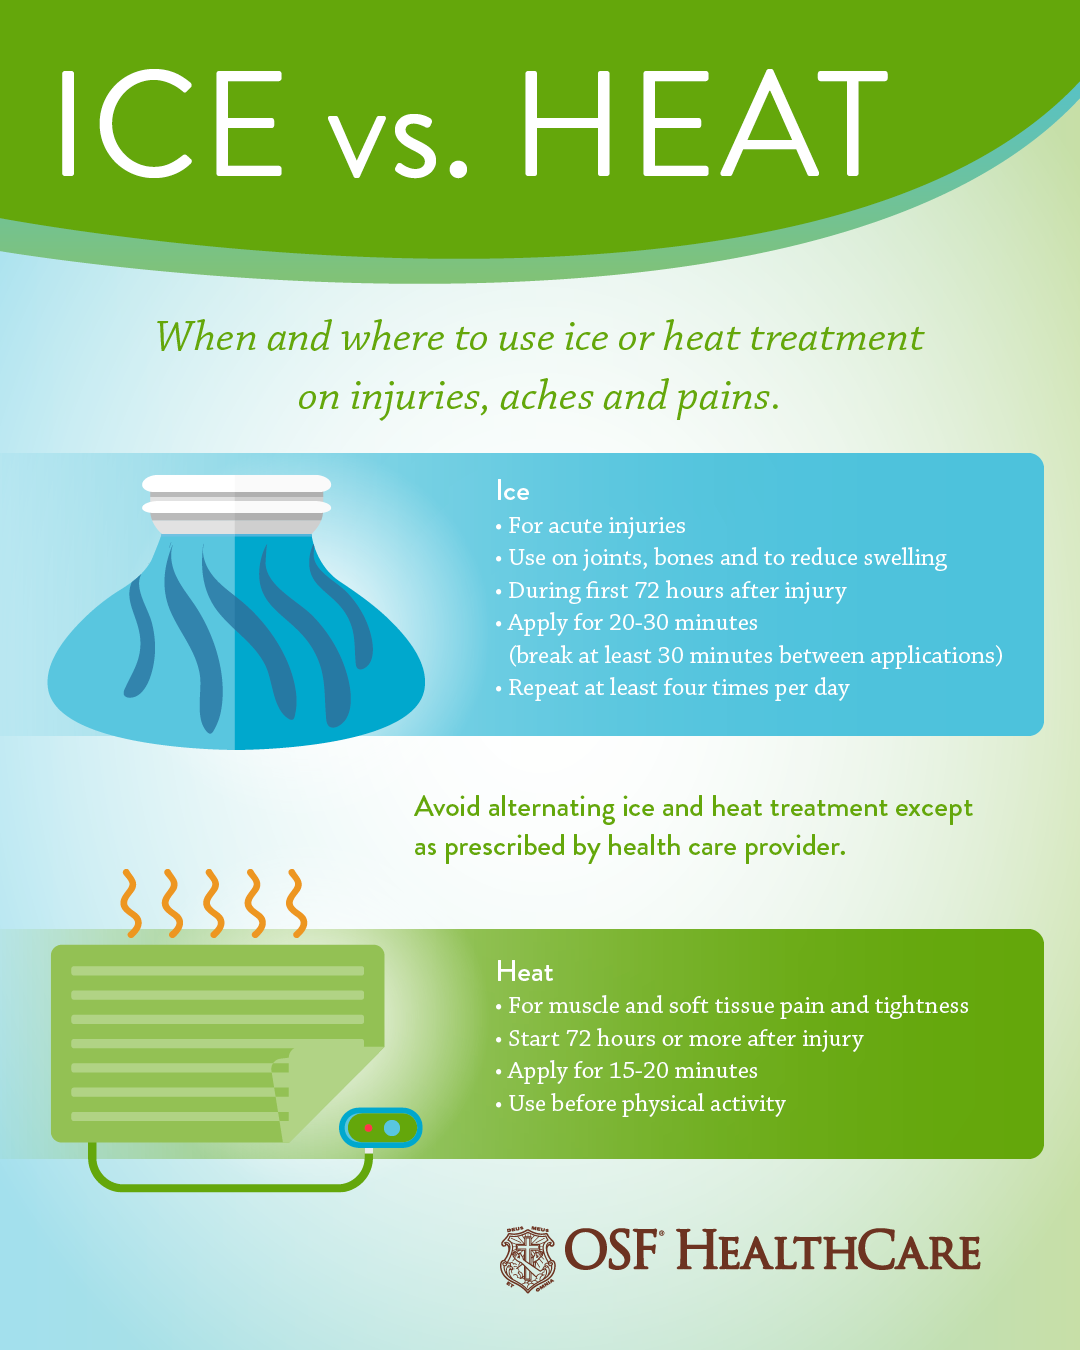 Alternating Hot and Cold Therapy: What You Need to Know